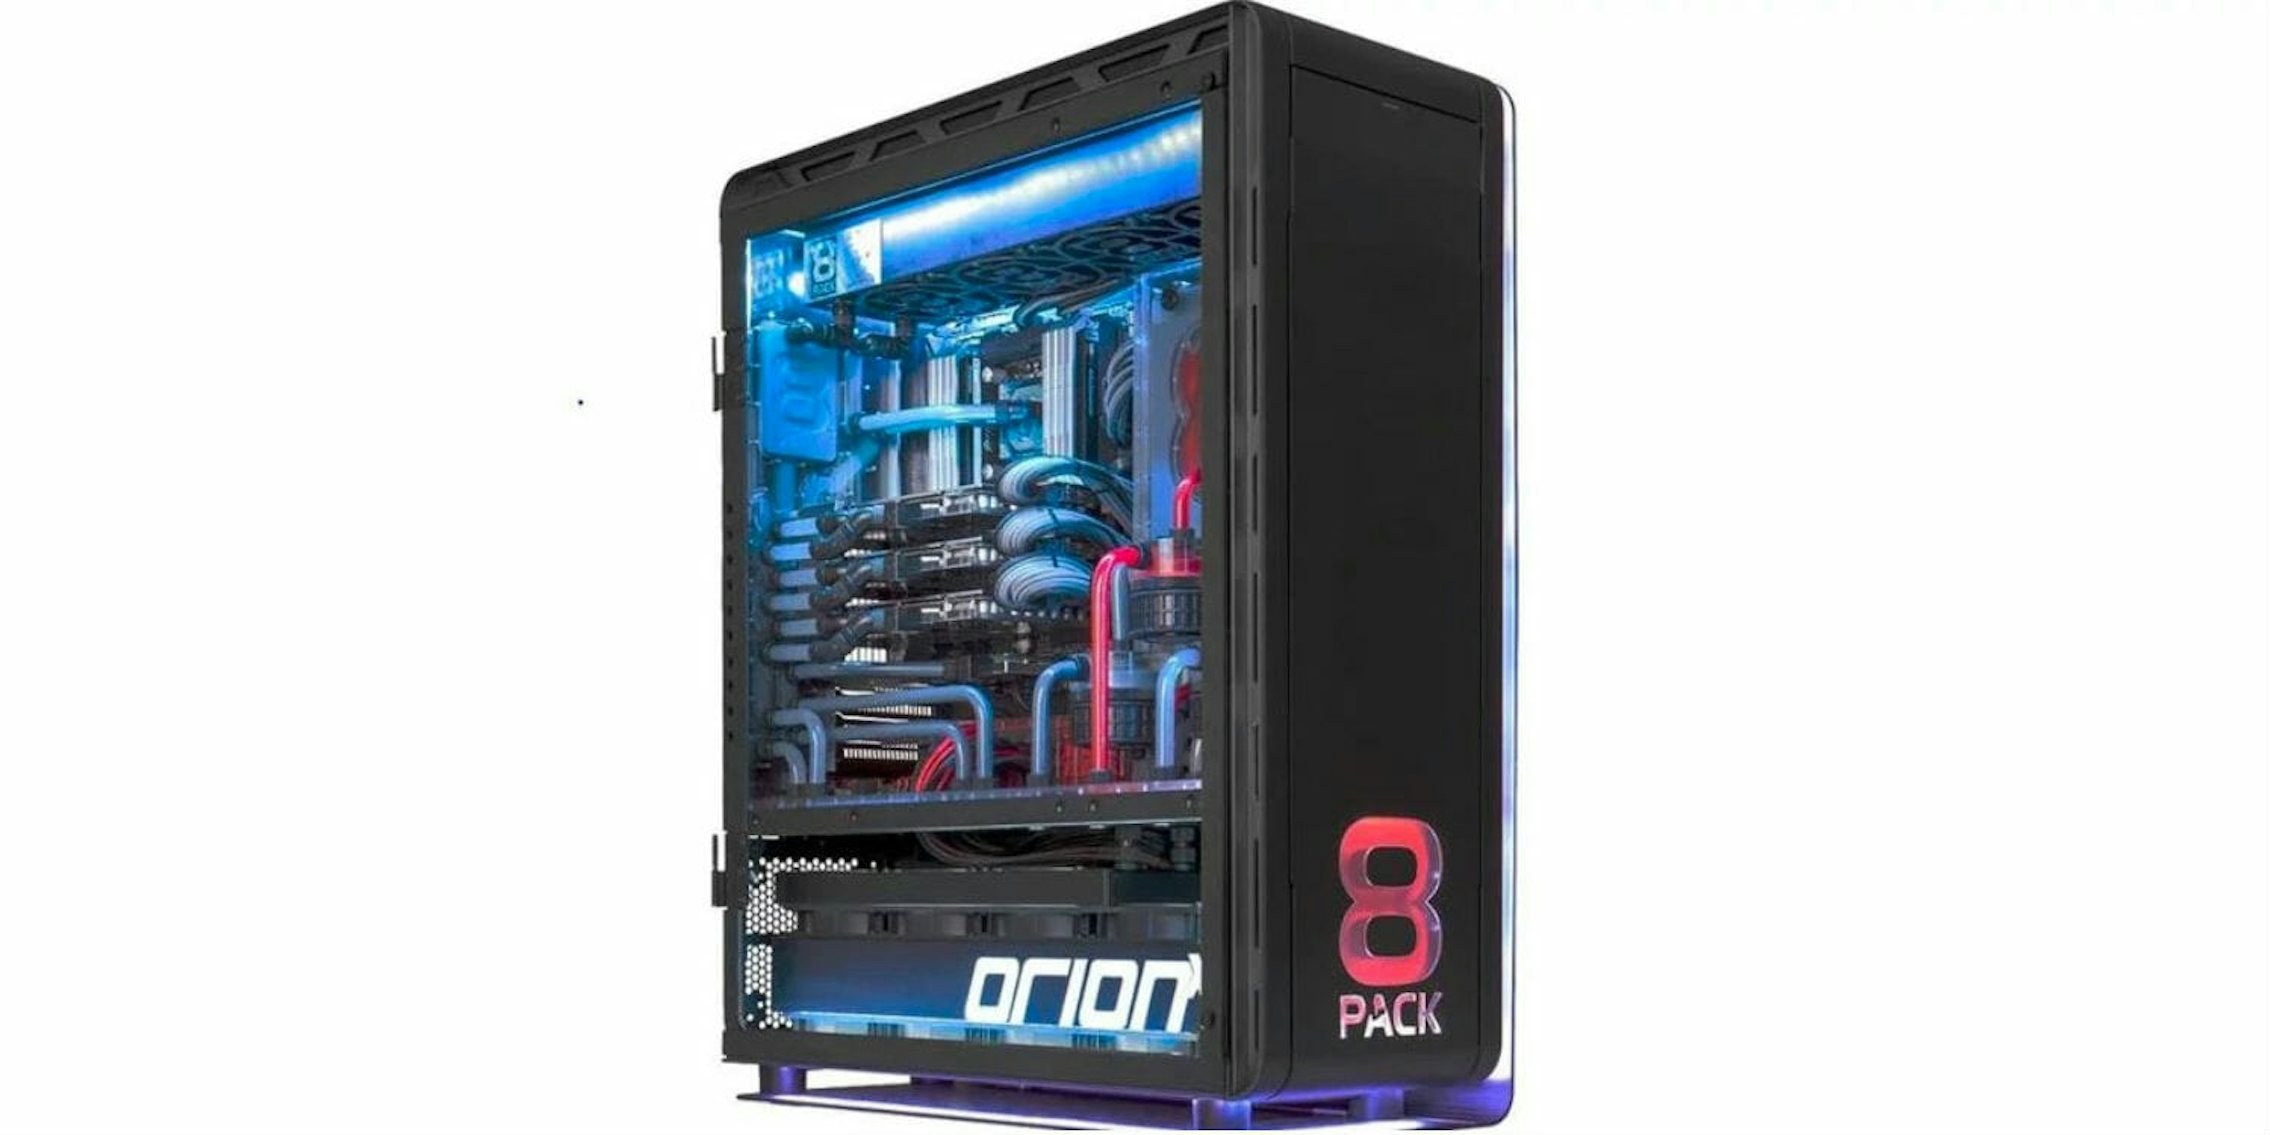 tyve Hest Urskive The Most Expensive Gaming Computer is Amazing